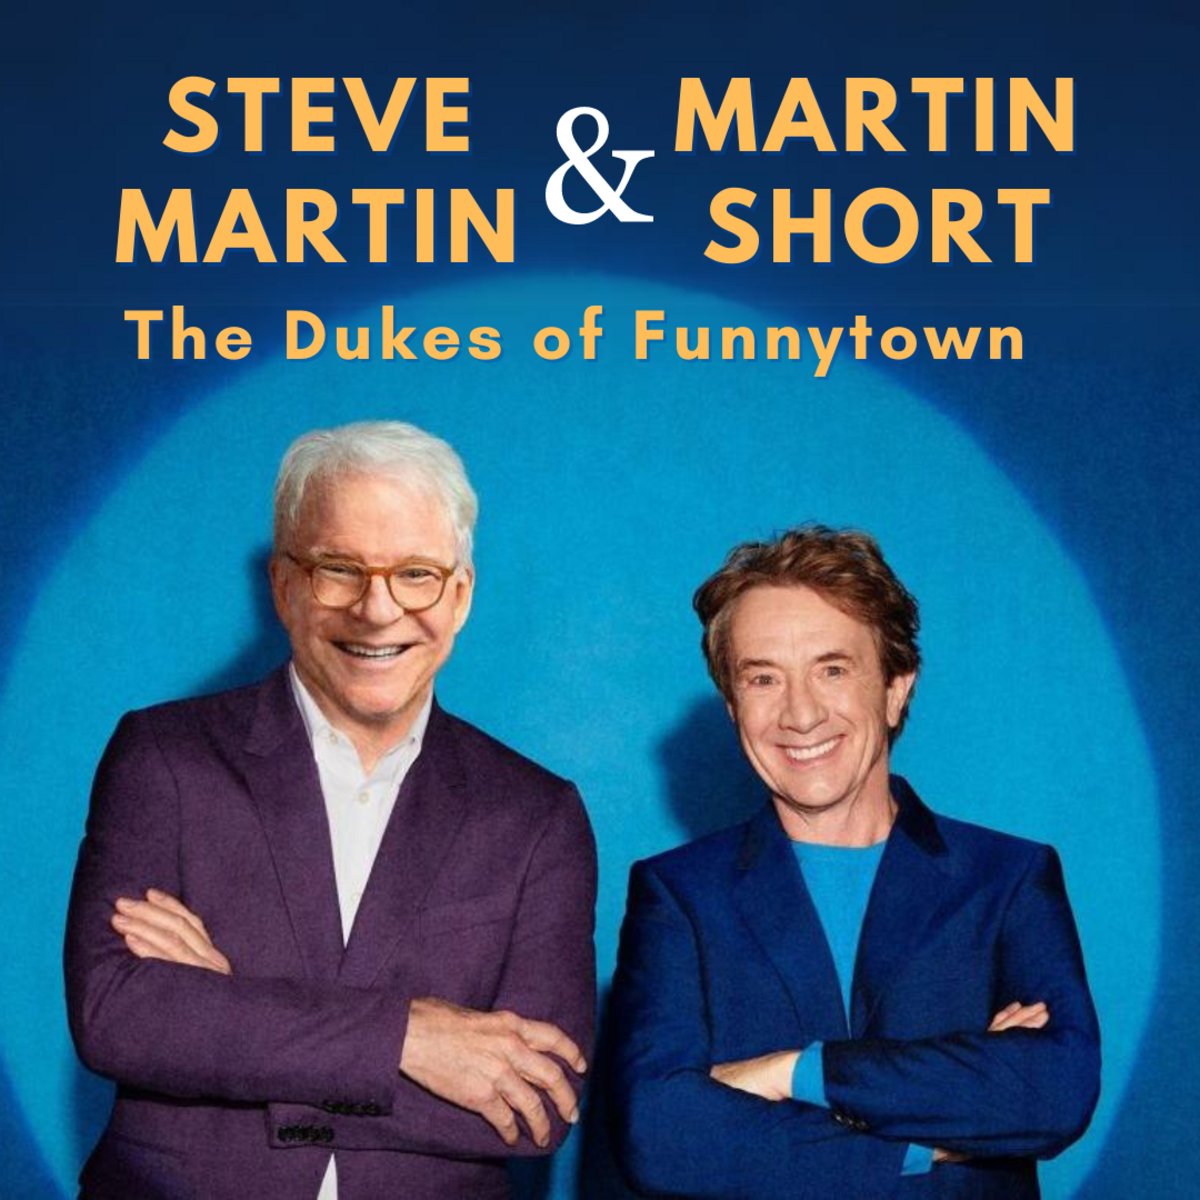 Don't miss your chance to see two masters of #comedy perform together as #SteveMartin and #MartinShort take the stage at #SheasBuffalo on May 4, 2024. Get your tickets and see why they deserve the title, The Dukes of Funnytown! 😂😂😂 Visit: bit.ly/4cO0u61